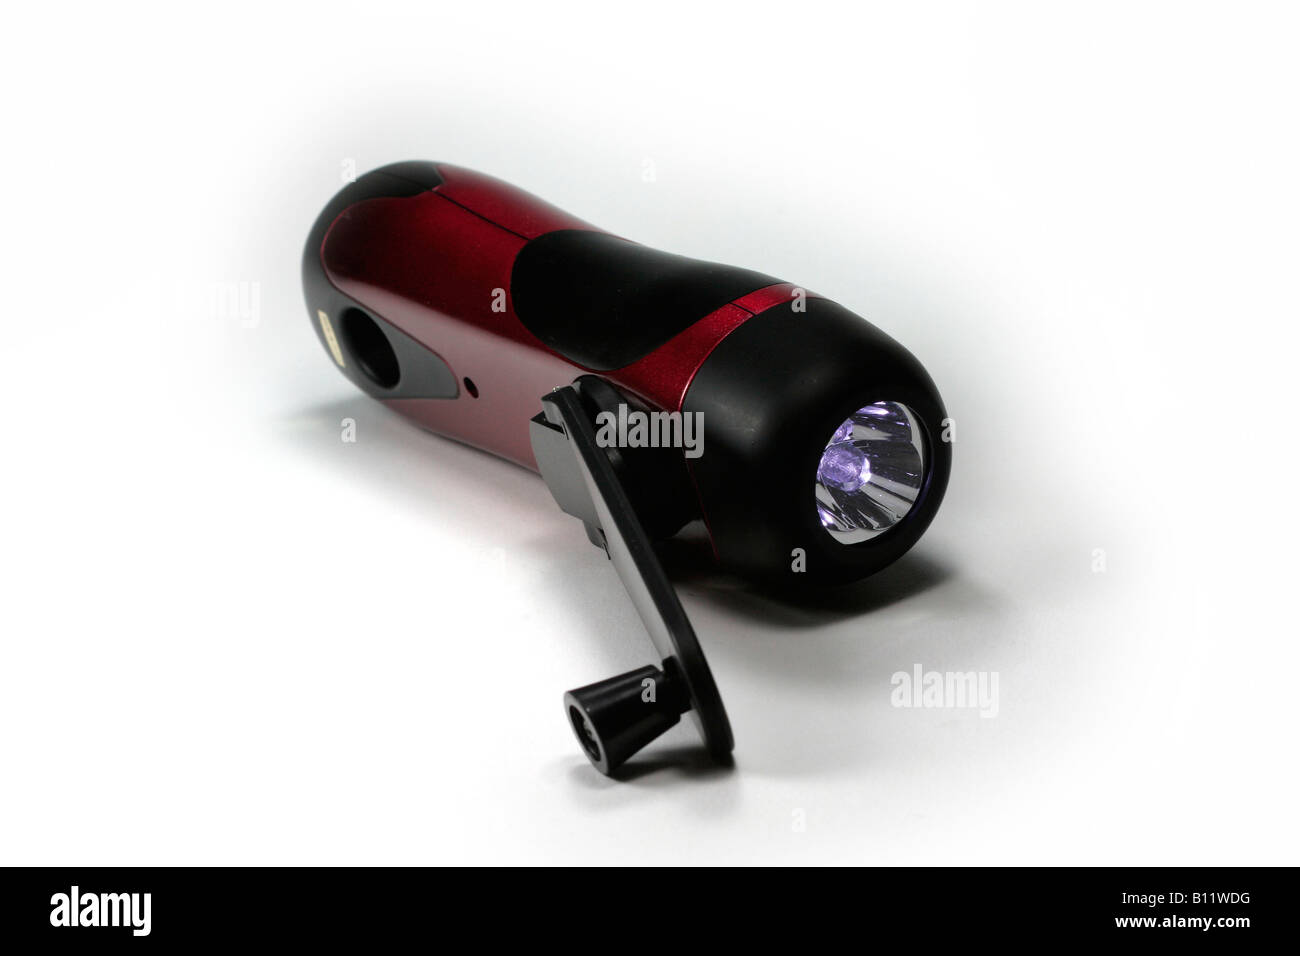 Crank powered torch uses no batteries Stock Photo